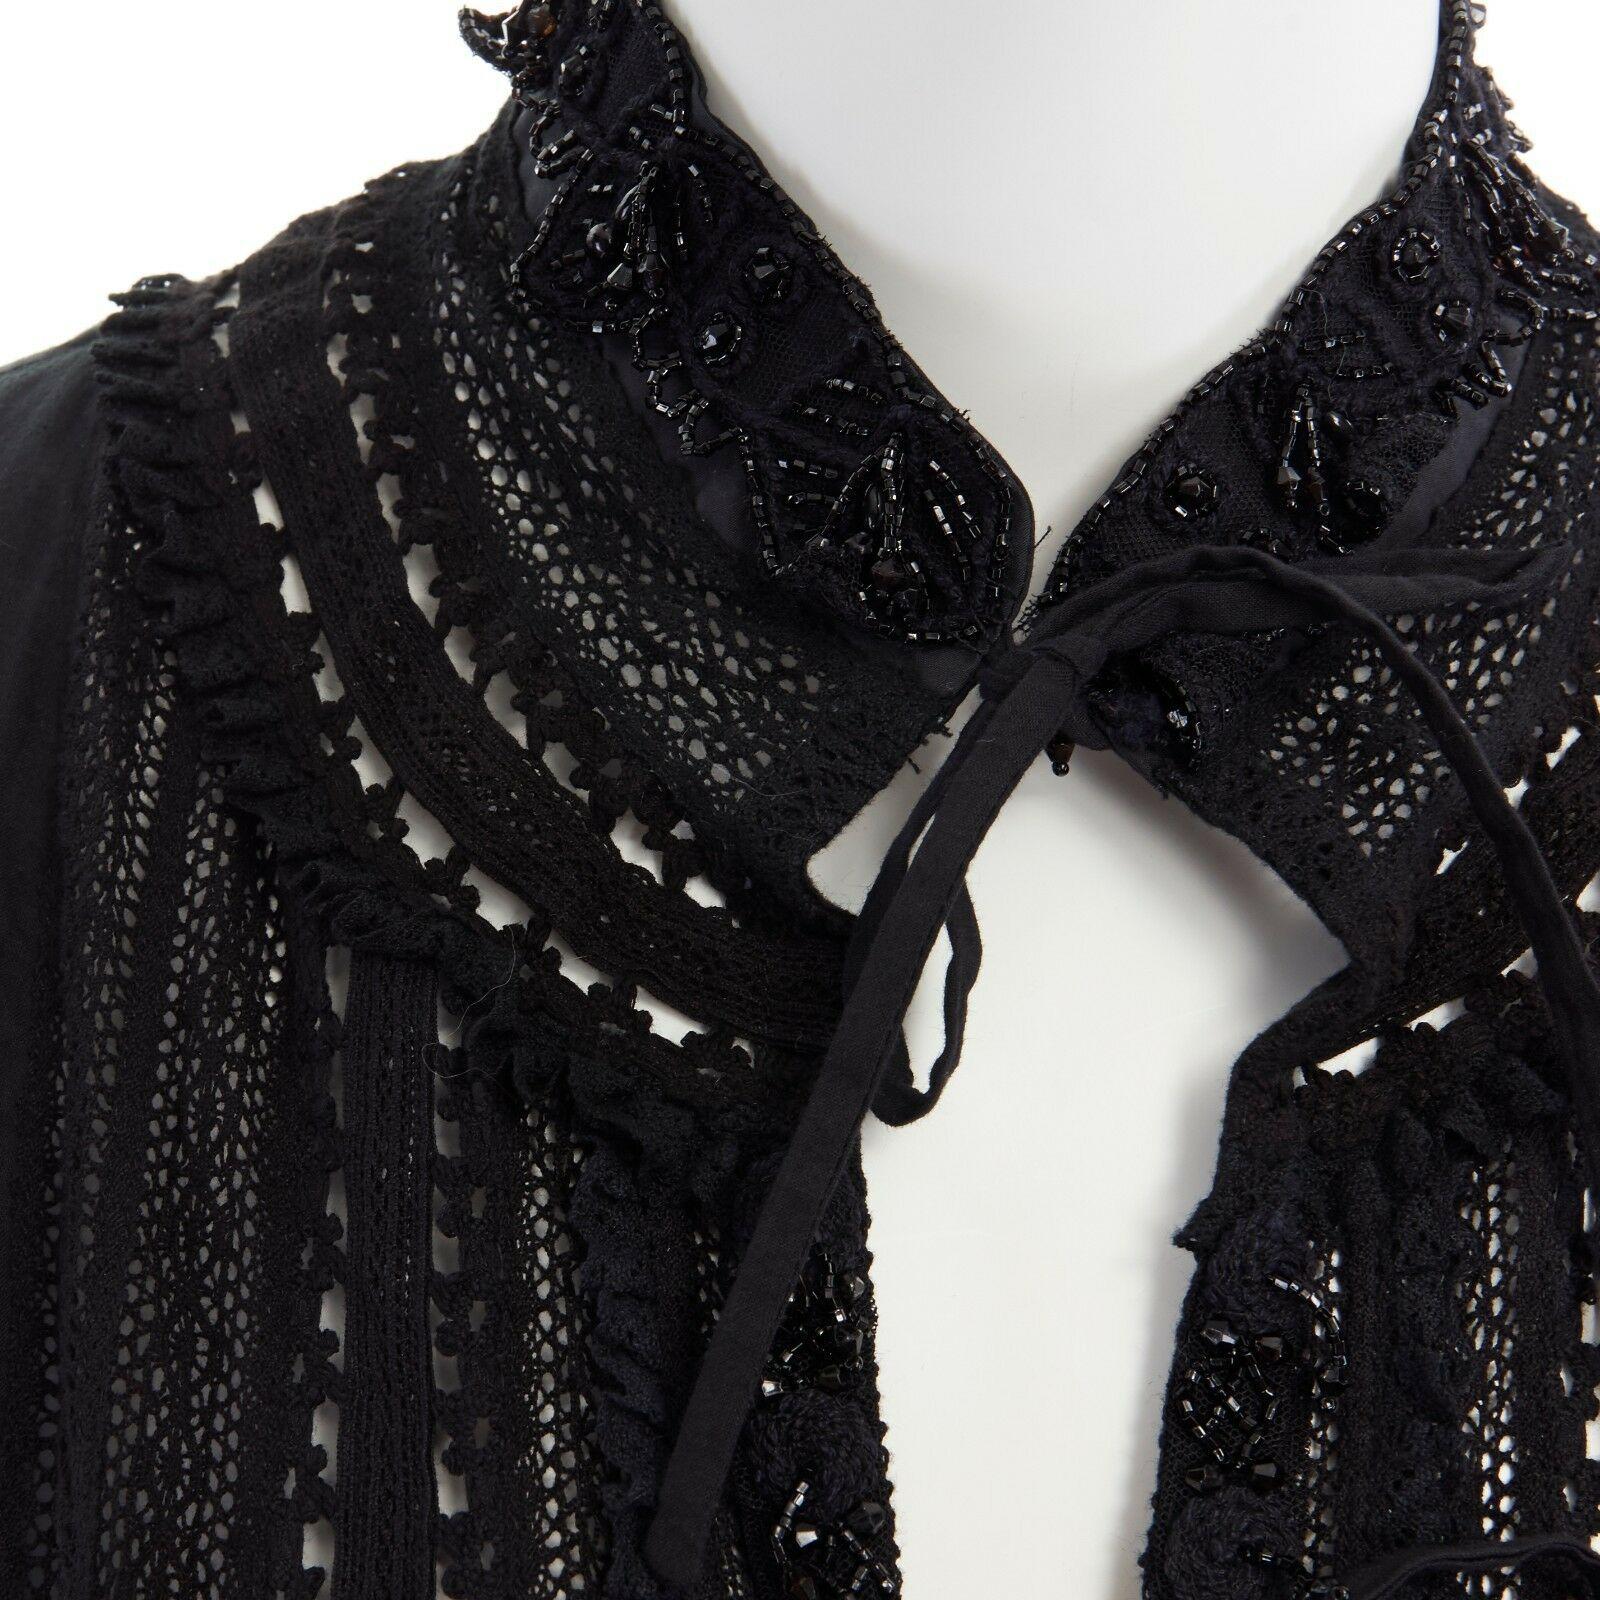 DRIES VAN NOTEN bead embellished bohemian embroidered tie front cotton top FR40

DRIES VAN NOTEN
Cotton, silk. Black. Bead embellished along collar and placket. 
Tonal floral embroidery throughout. Eyelet trim throughout. 
Rounded shoulder. Short